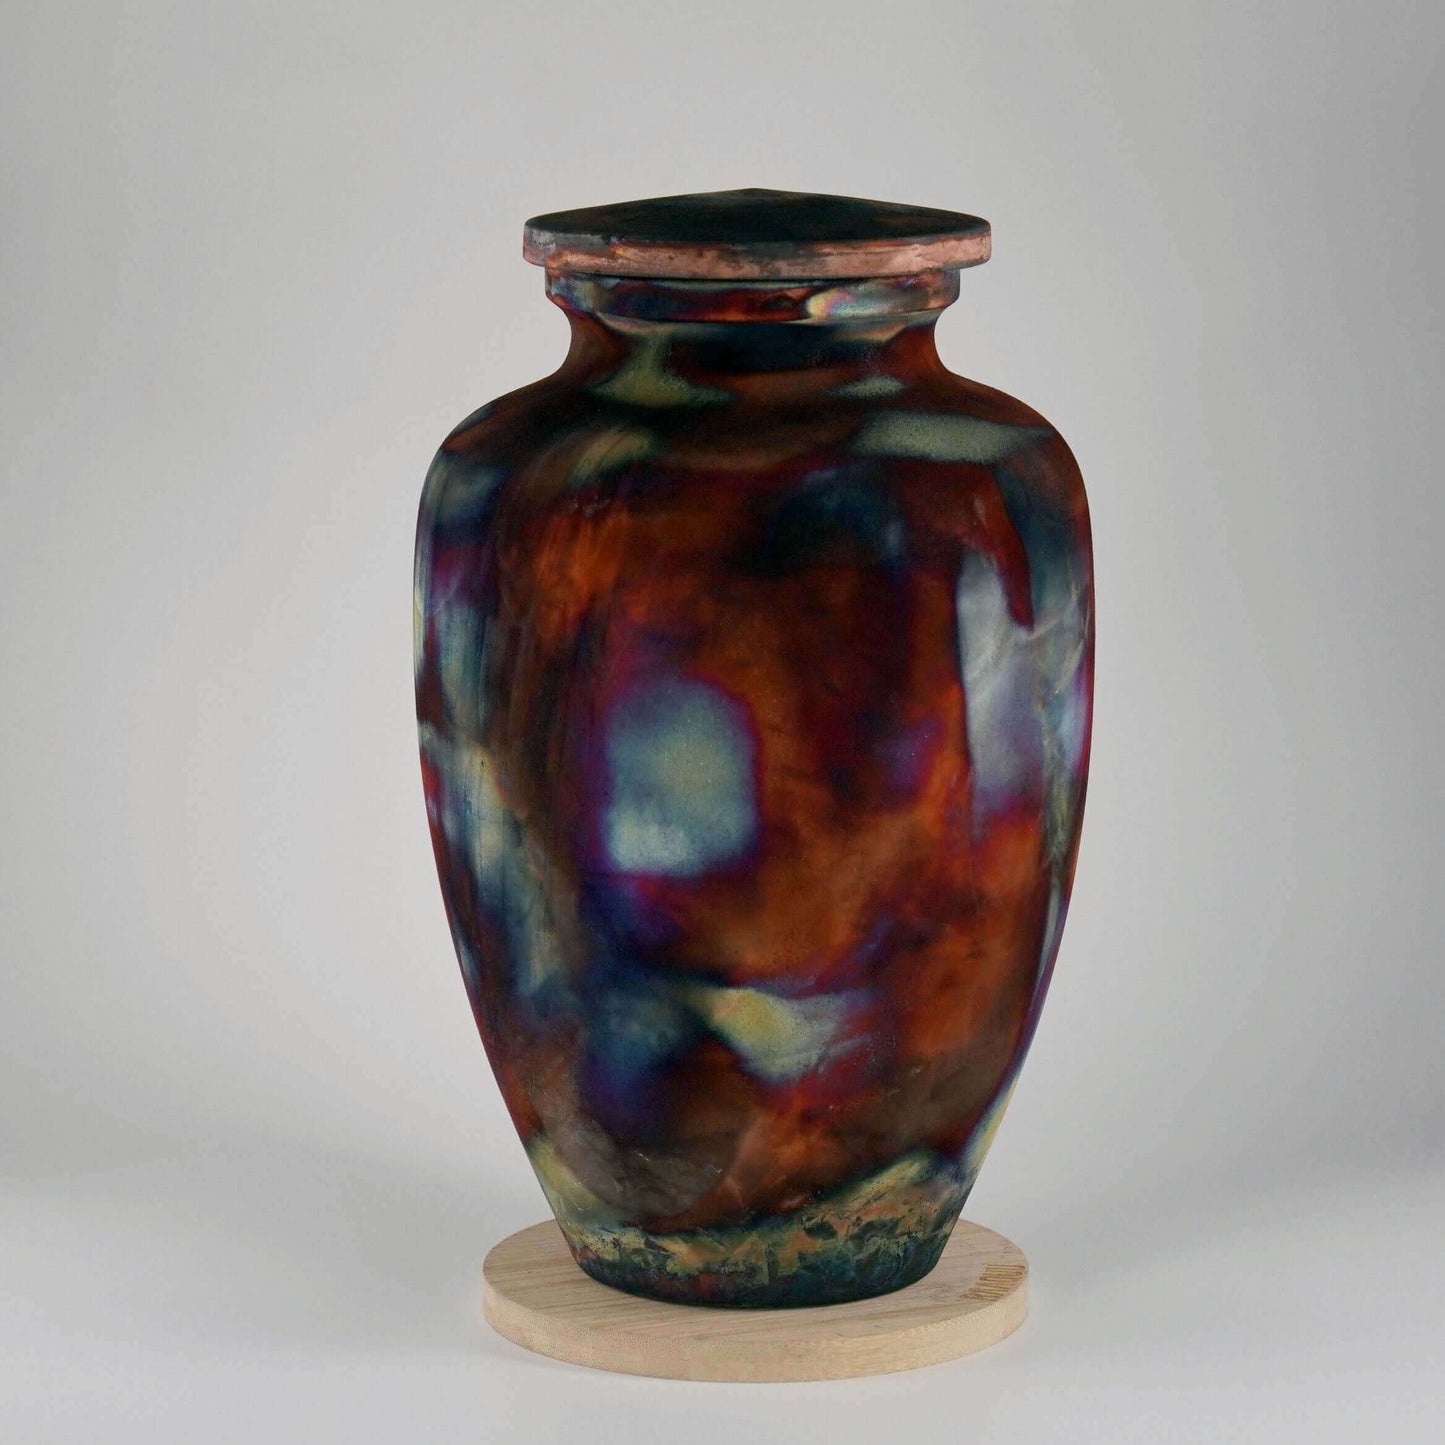 RAAQUU Omoide Ceramic Full Copper Matte Urn for Adult Remains/Ashes S/N80000109 - Raku Pottery 170 cubic inches Unique Handmade Cremation Vessel